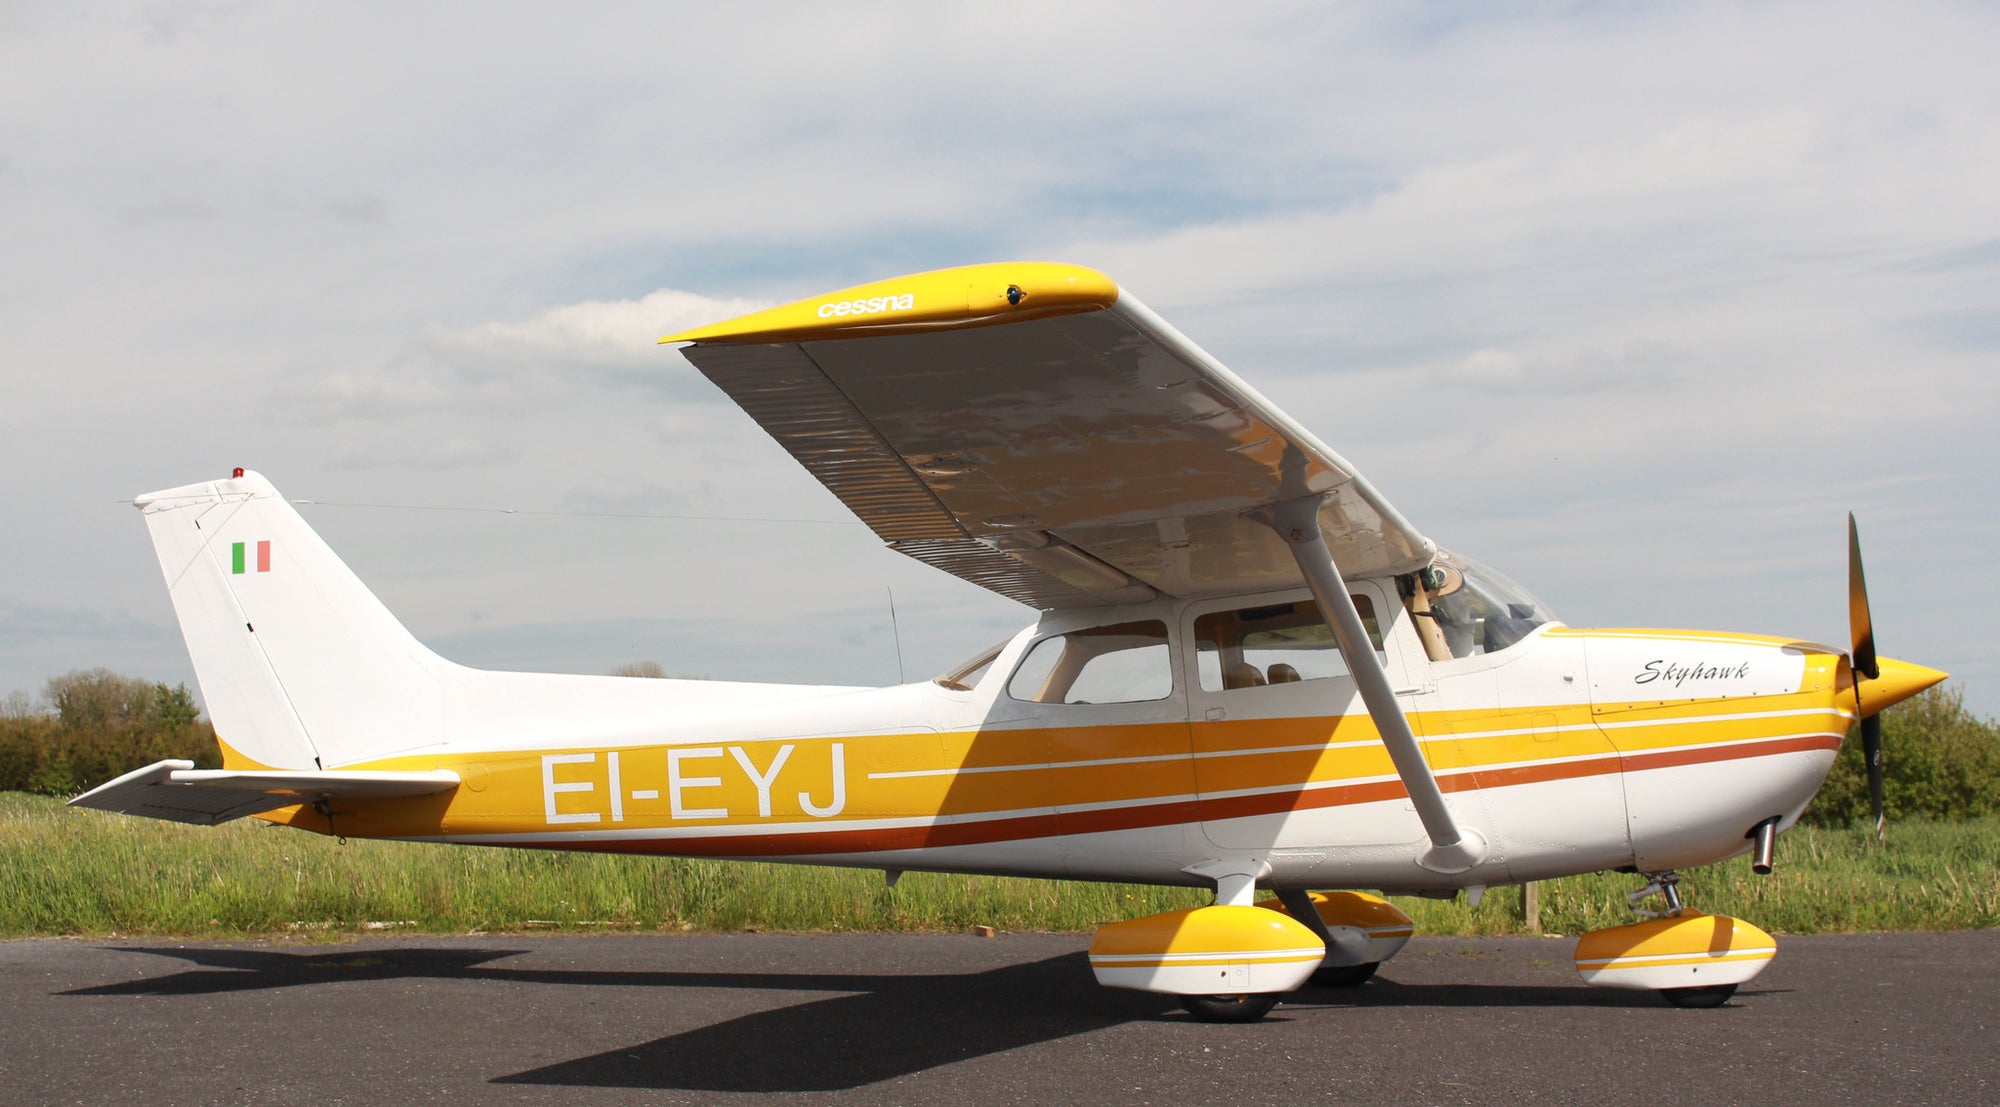 Cessna 172 - Always planes for sale, not all as good as the 172!